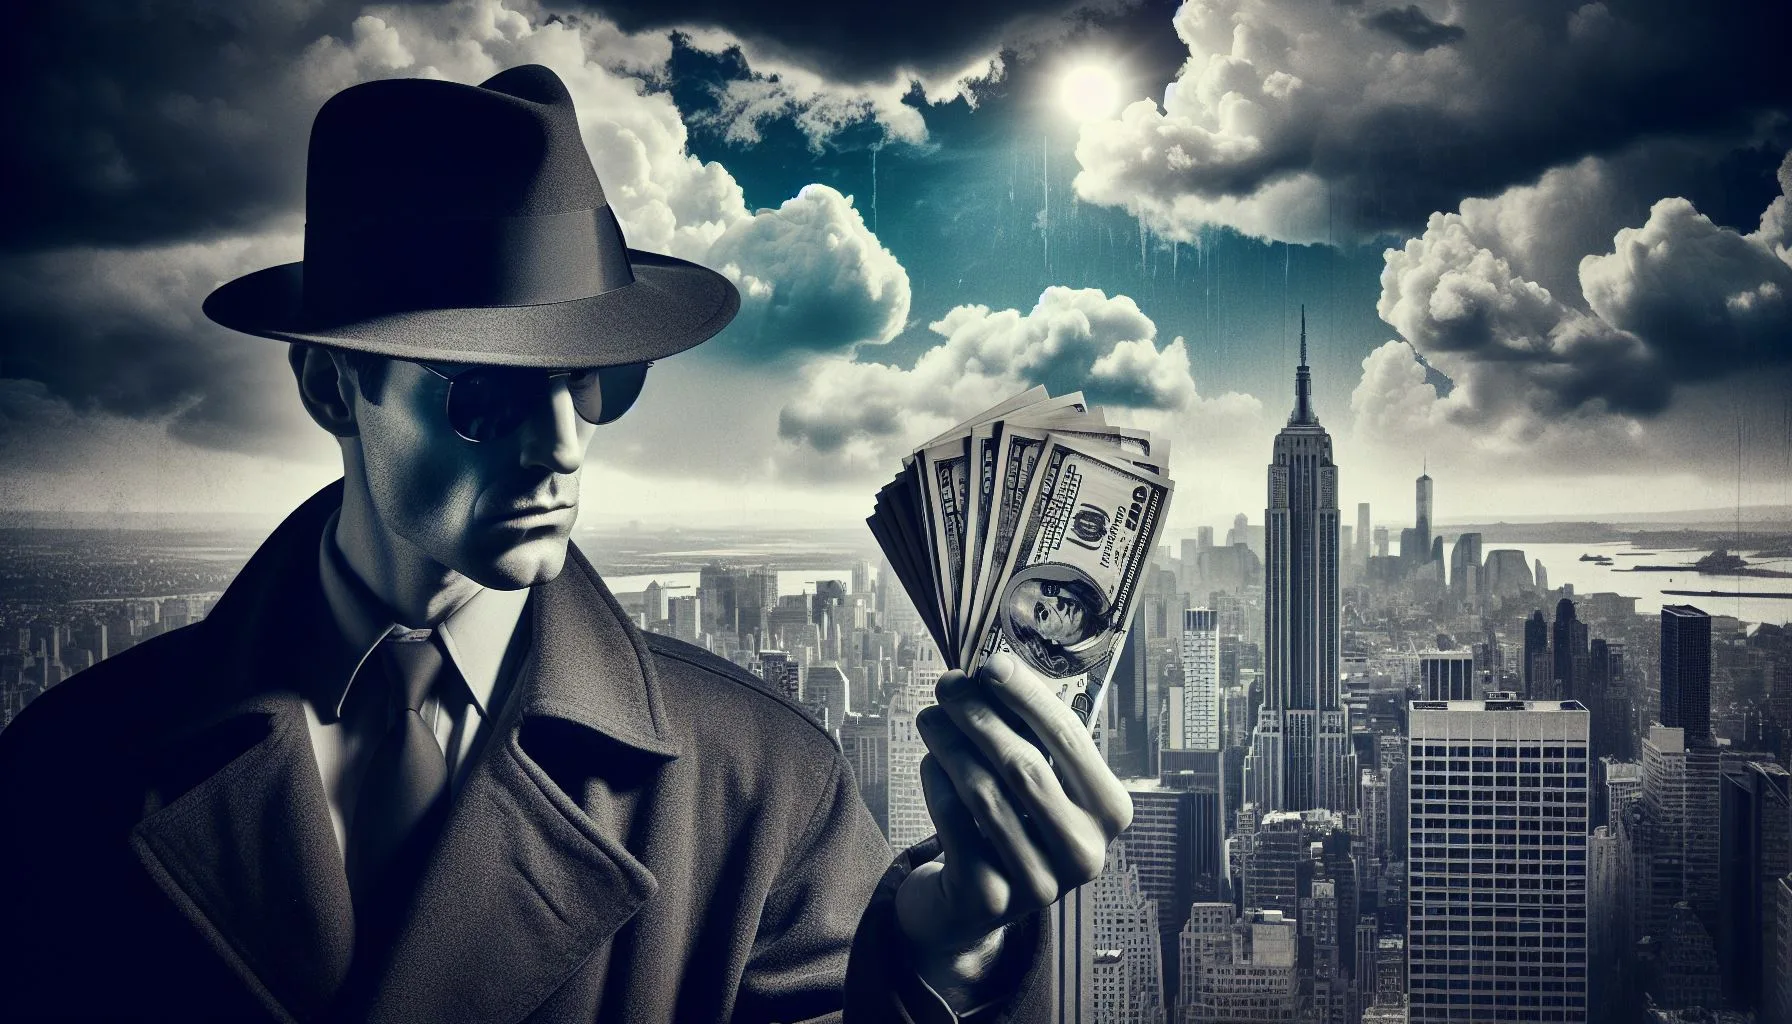 digital transformation cut costs shown by detective holding cash against cloudy background